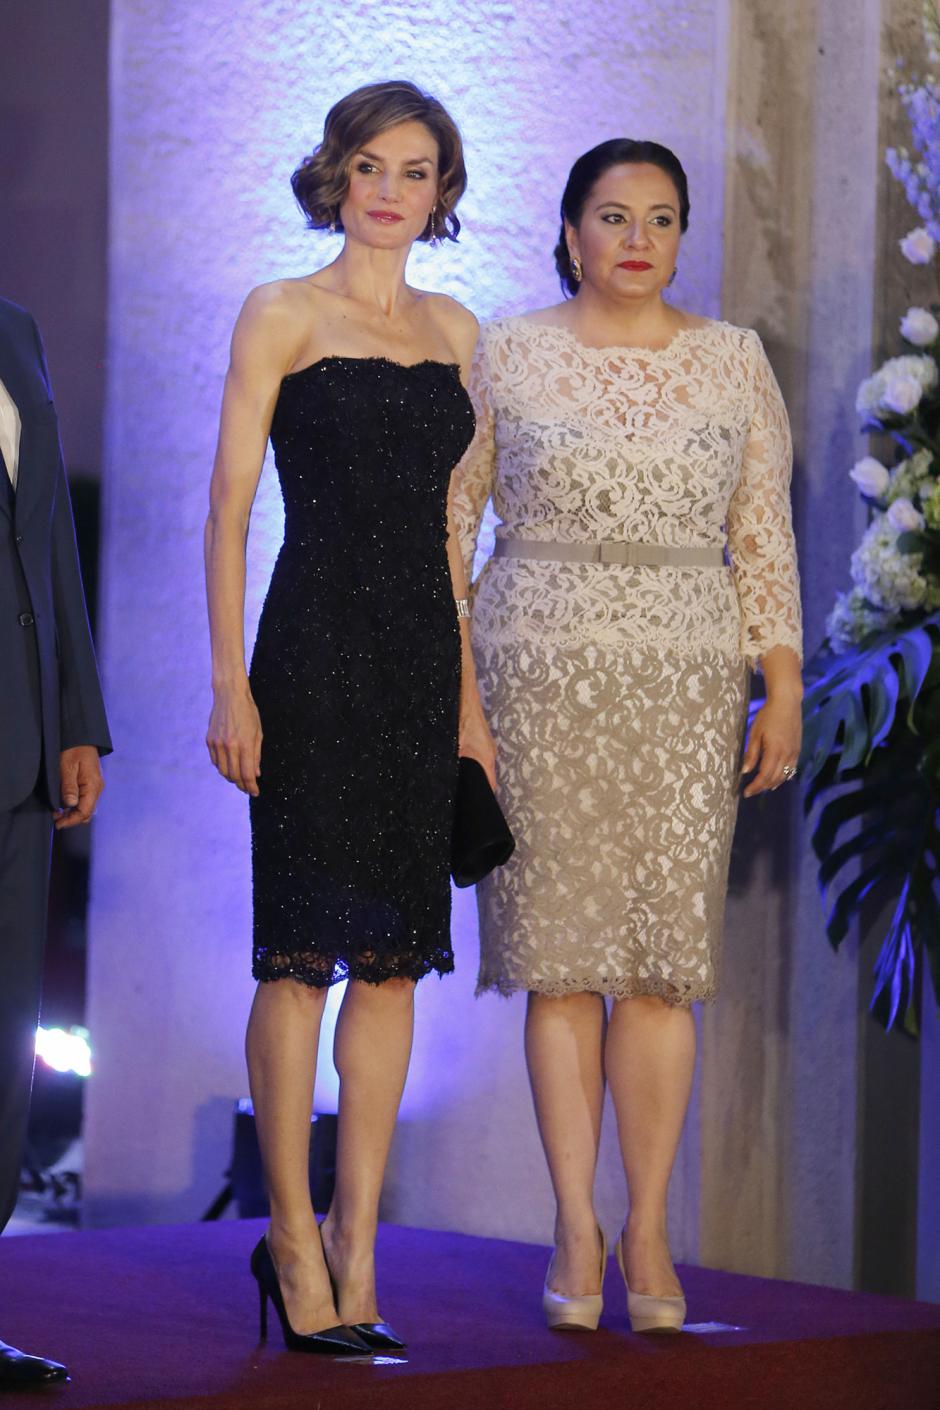 Queen of Span Letizia Ortiz and First lady of Honduras Ana Garcia during an official dinner in honor of Queen of Spain in Tegucigualpa, Honduras.
25th May, 2015